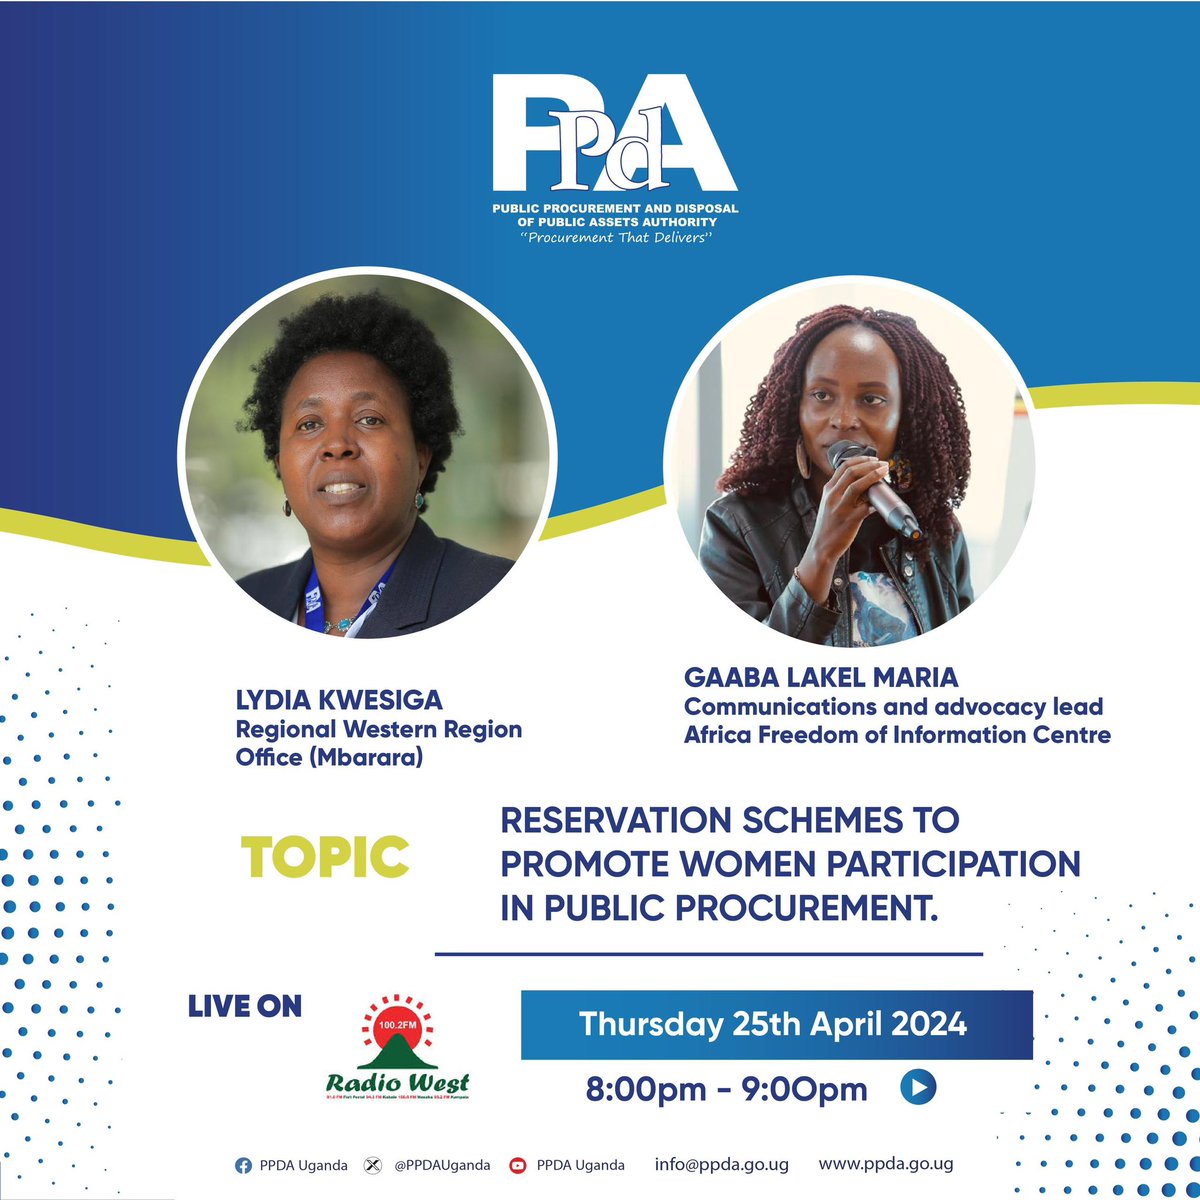 📍Mbarara City | @radiowestug ⏰ 8:00pm - 9:00pm. Tonight with @africafoicentre we discuss measures to #LIFT Women Entrepreneurs’ participation in public procurement in Mbarara City. Research shows that only 6 of the 56 prequalified companies by the City are women owned!